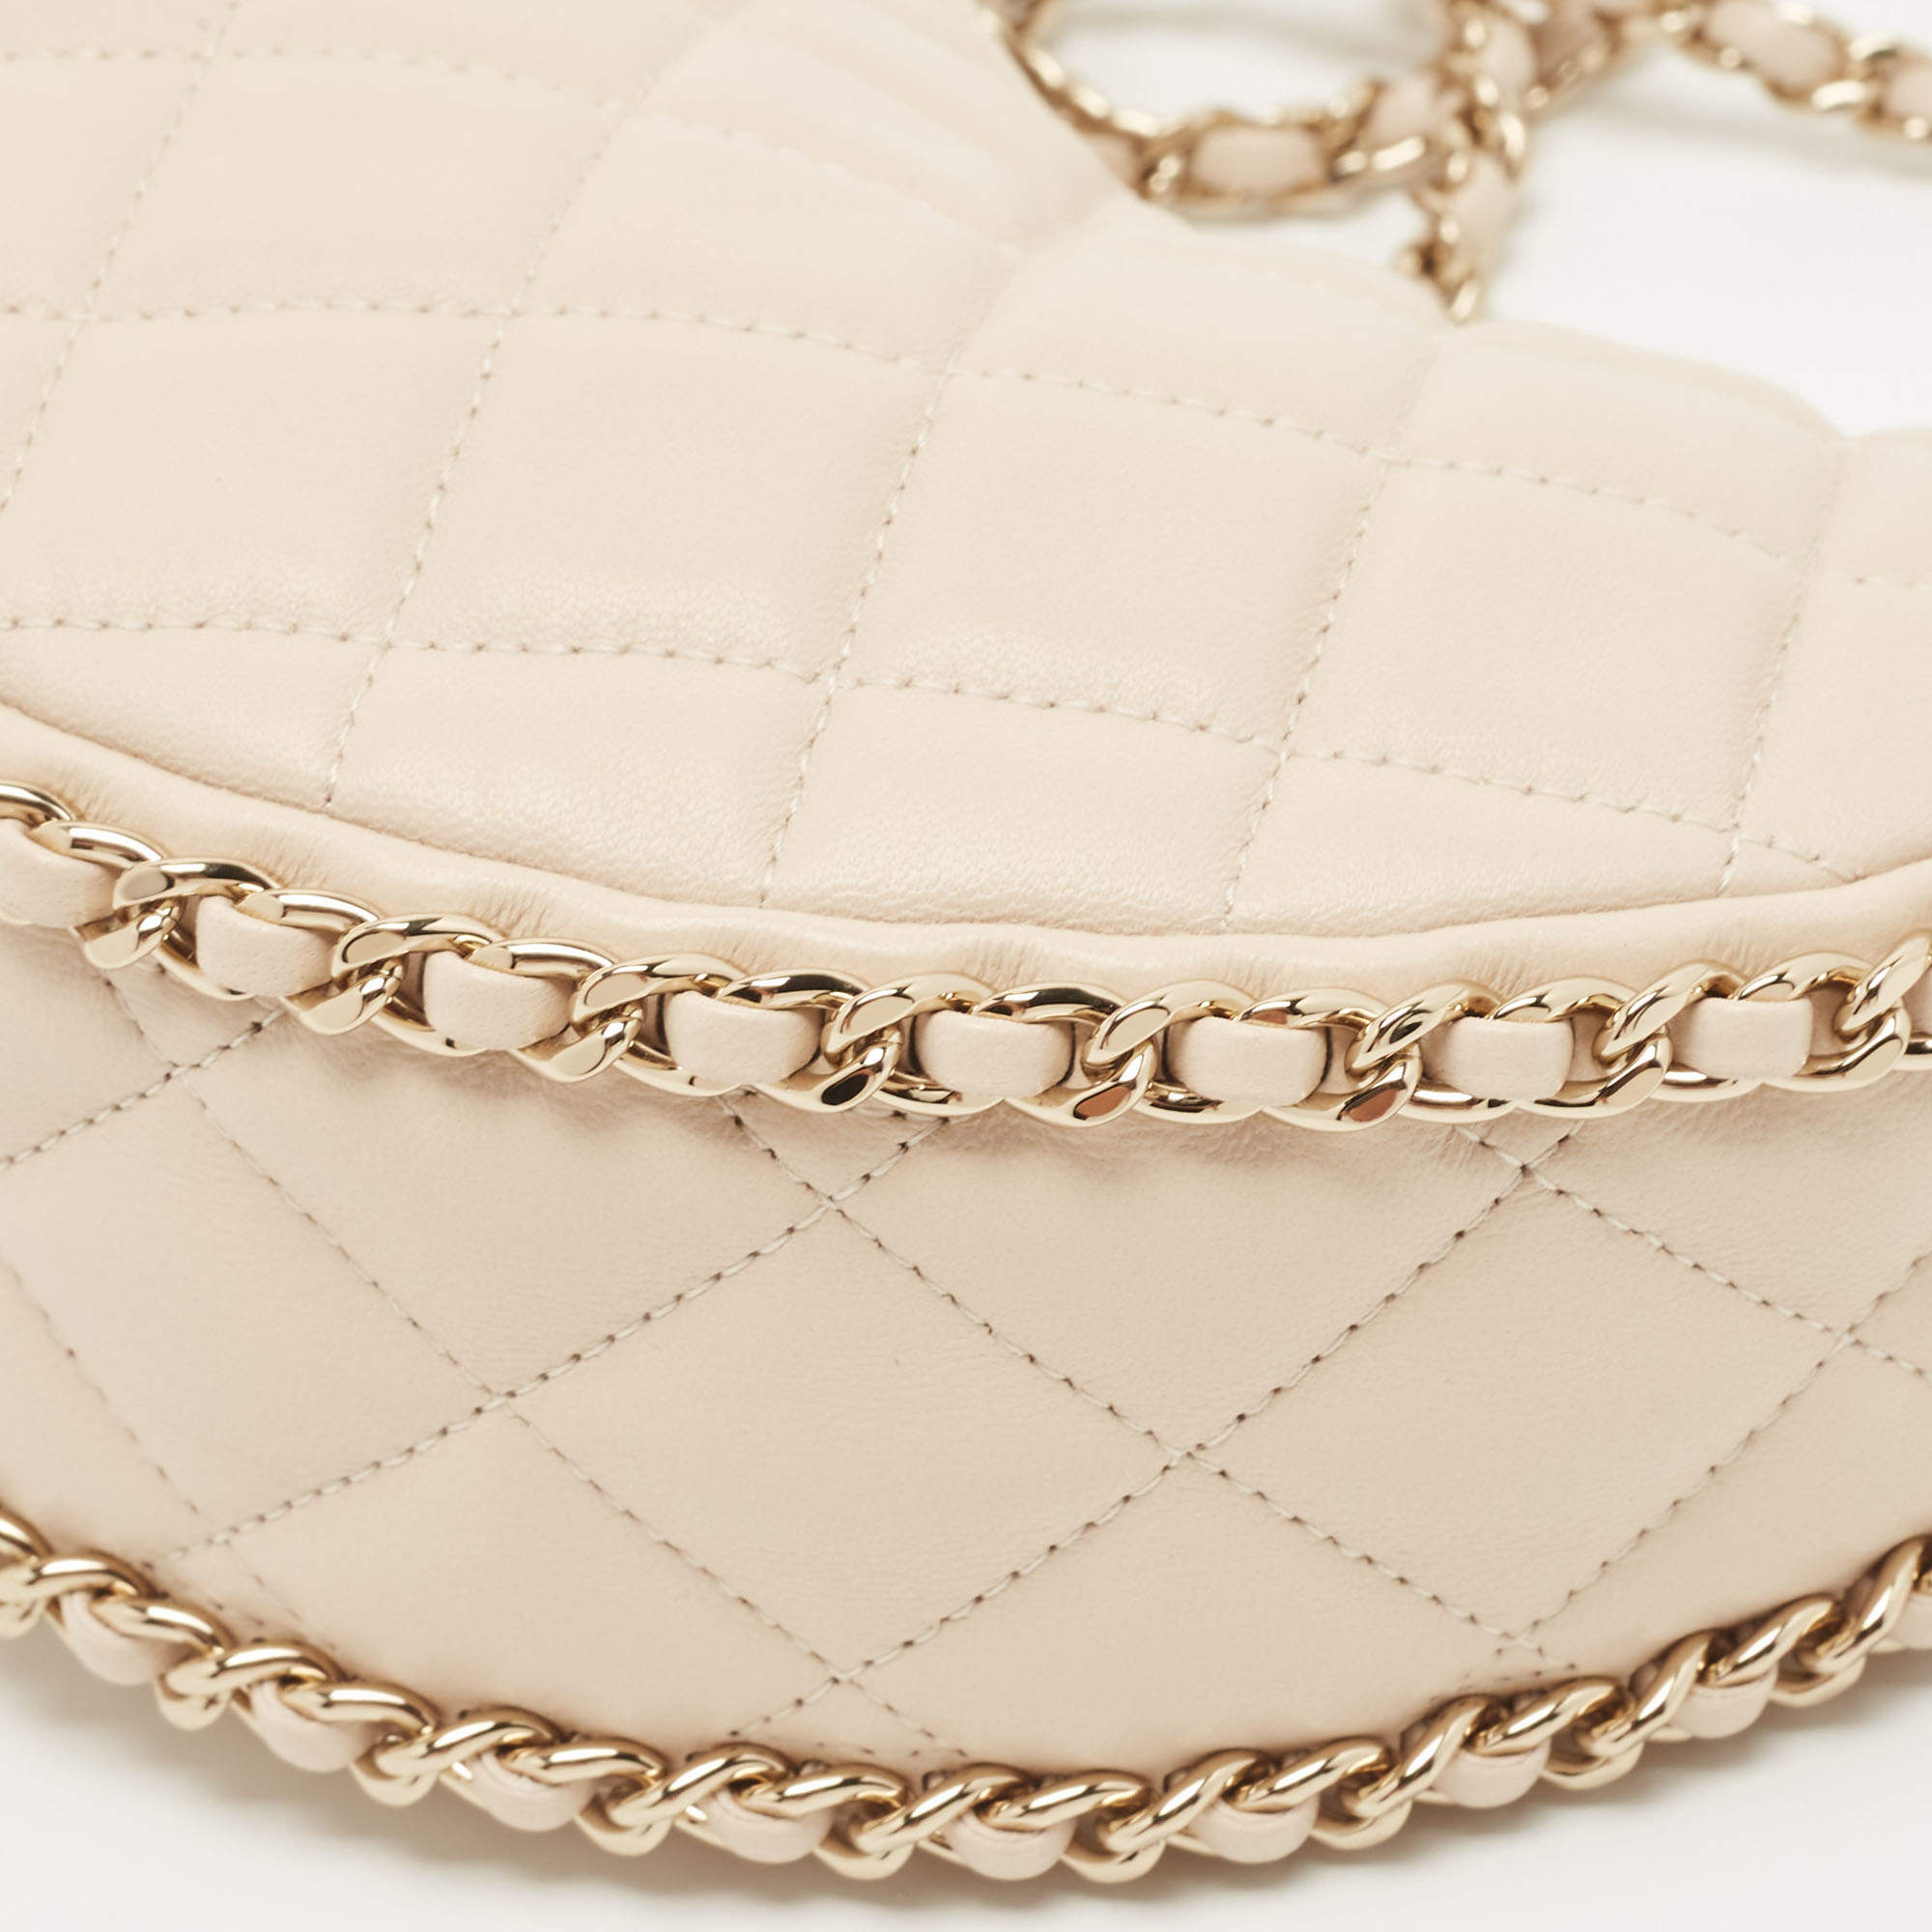 Chanel Light Beige Quilted Leather Chain Around Shoulder Bag Chanel